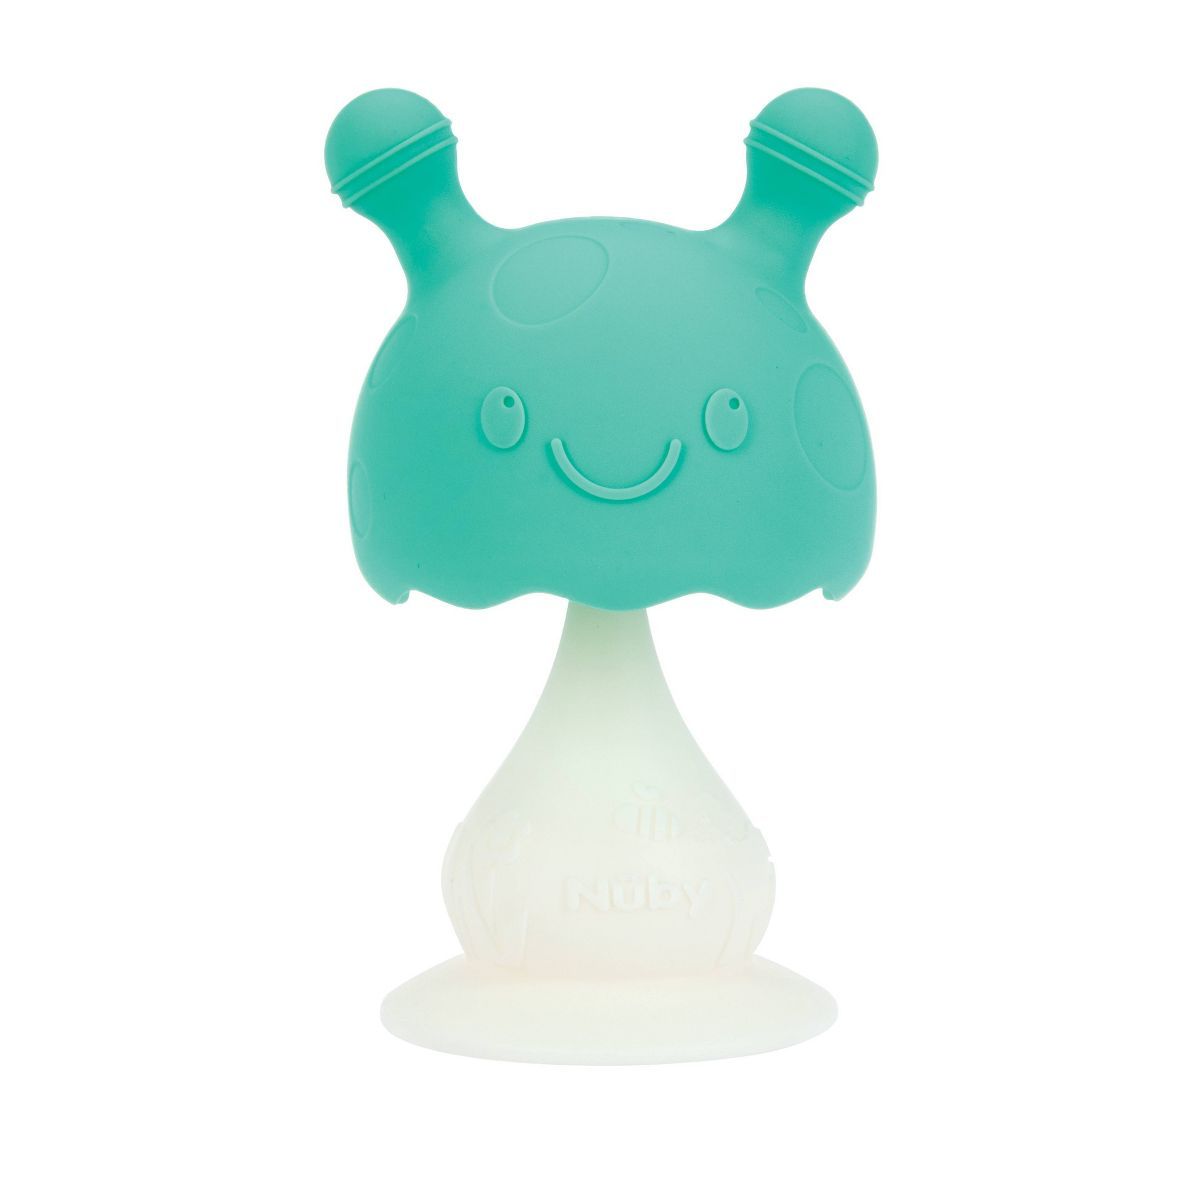 Nuby Silicone Bobble Head Teether for Babies | Target